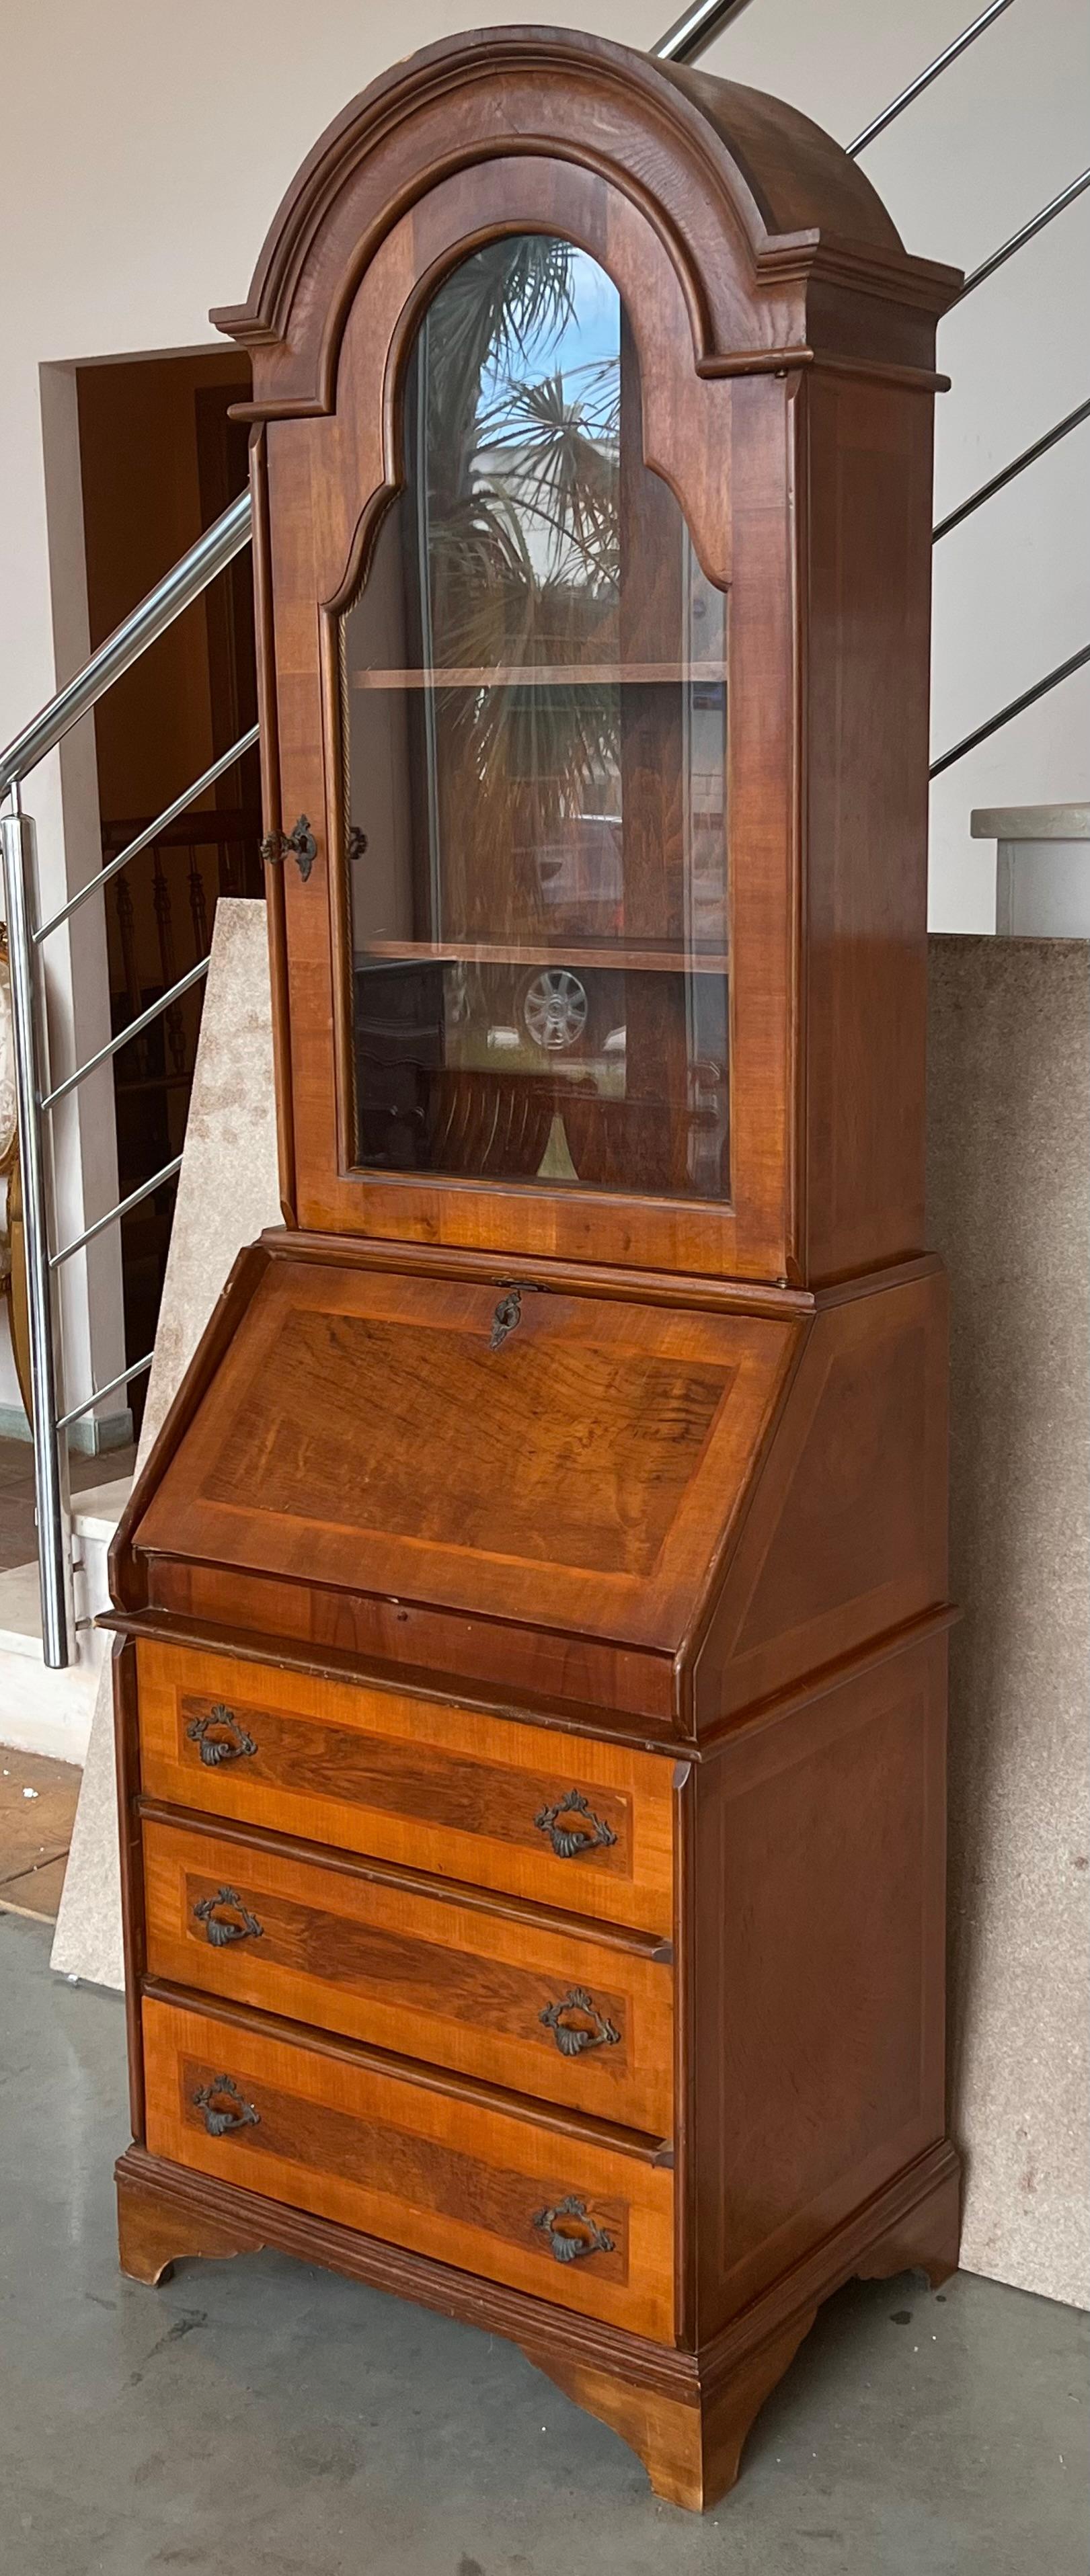 This is a charming George l style walnut diminutive secretary. The domed cornice over a conforming vitrine cabinet . The bottom section contains a drop-front opening to reveal a leather-inset writing surface and cubby holes above three long